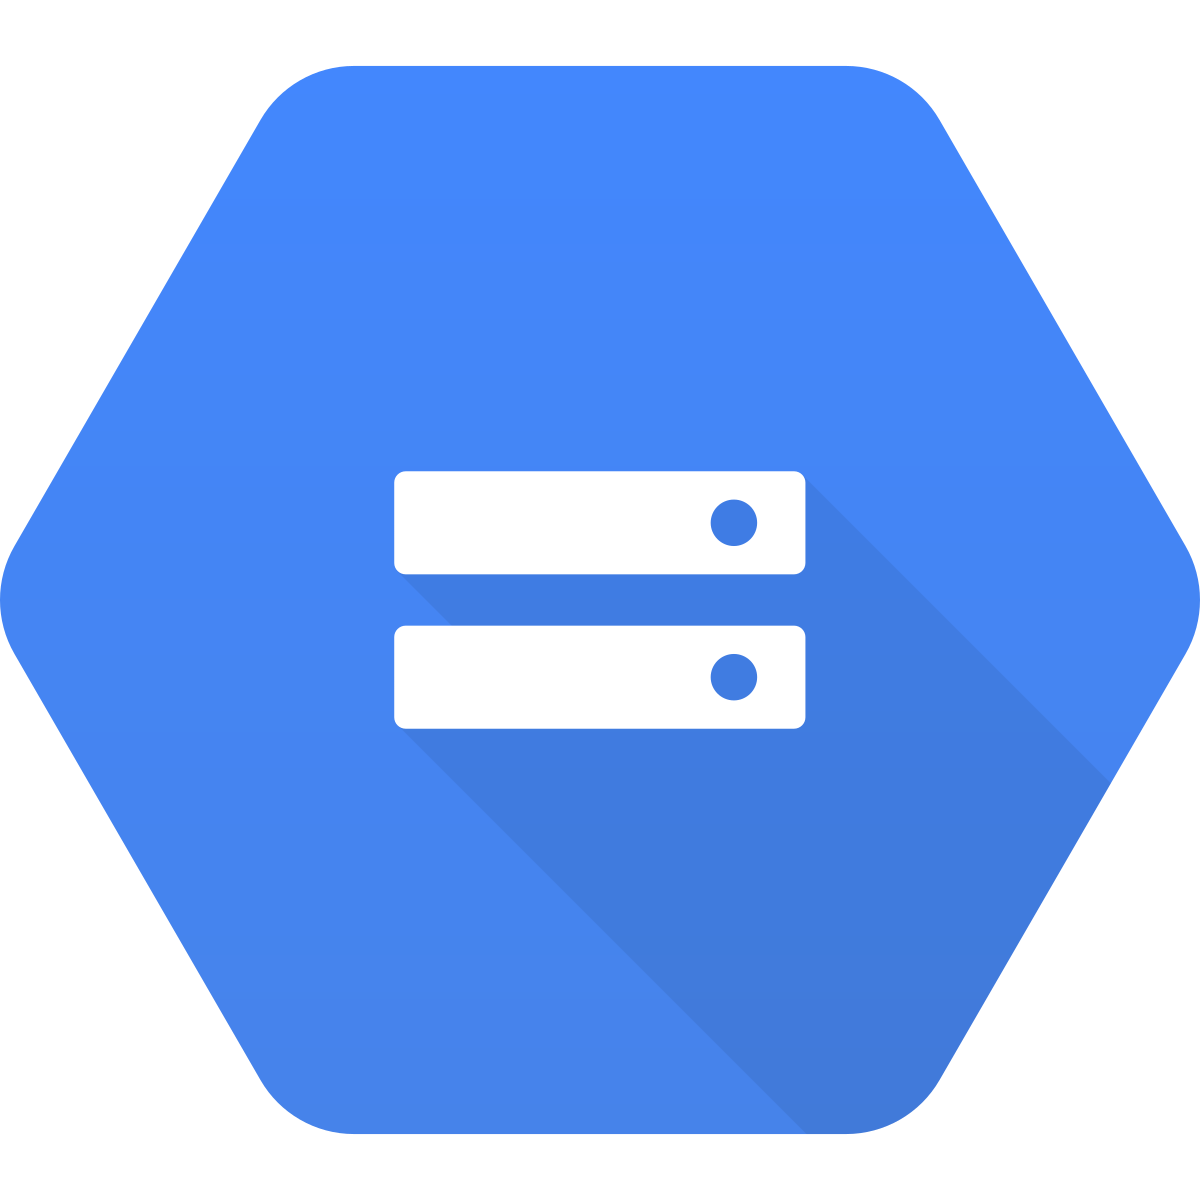 Sync data from Google Cloud Storage to Box.